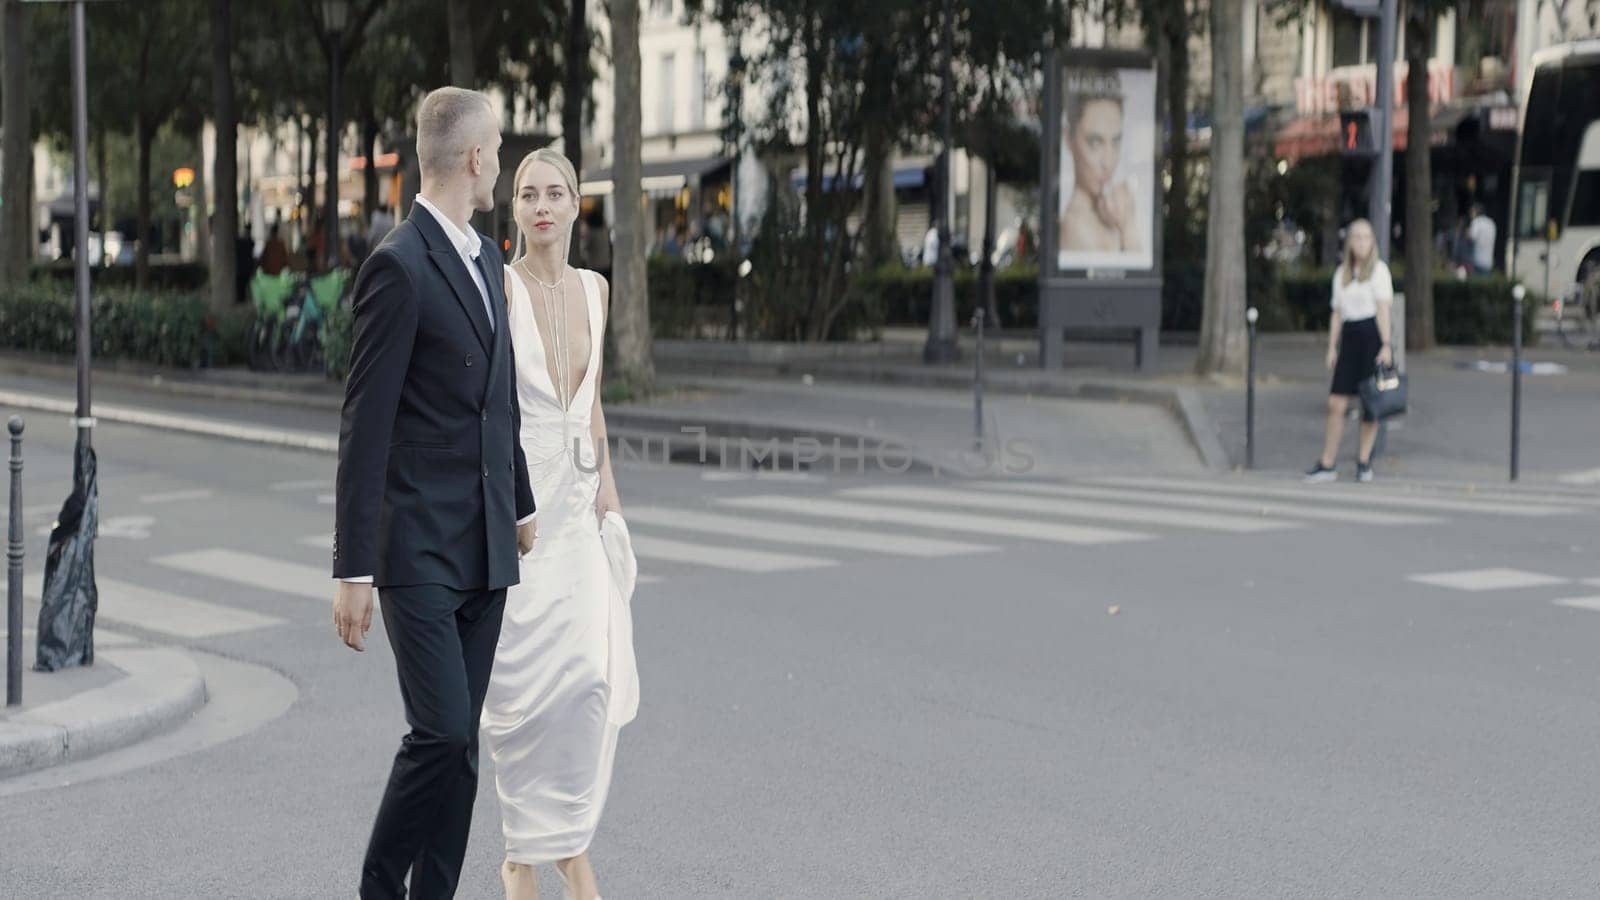 A walking European couple on a summer street. Action. Newlyweds in suits walking on the roads in hot weather. by Mediawhalestock